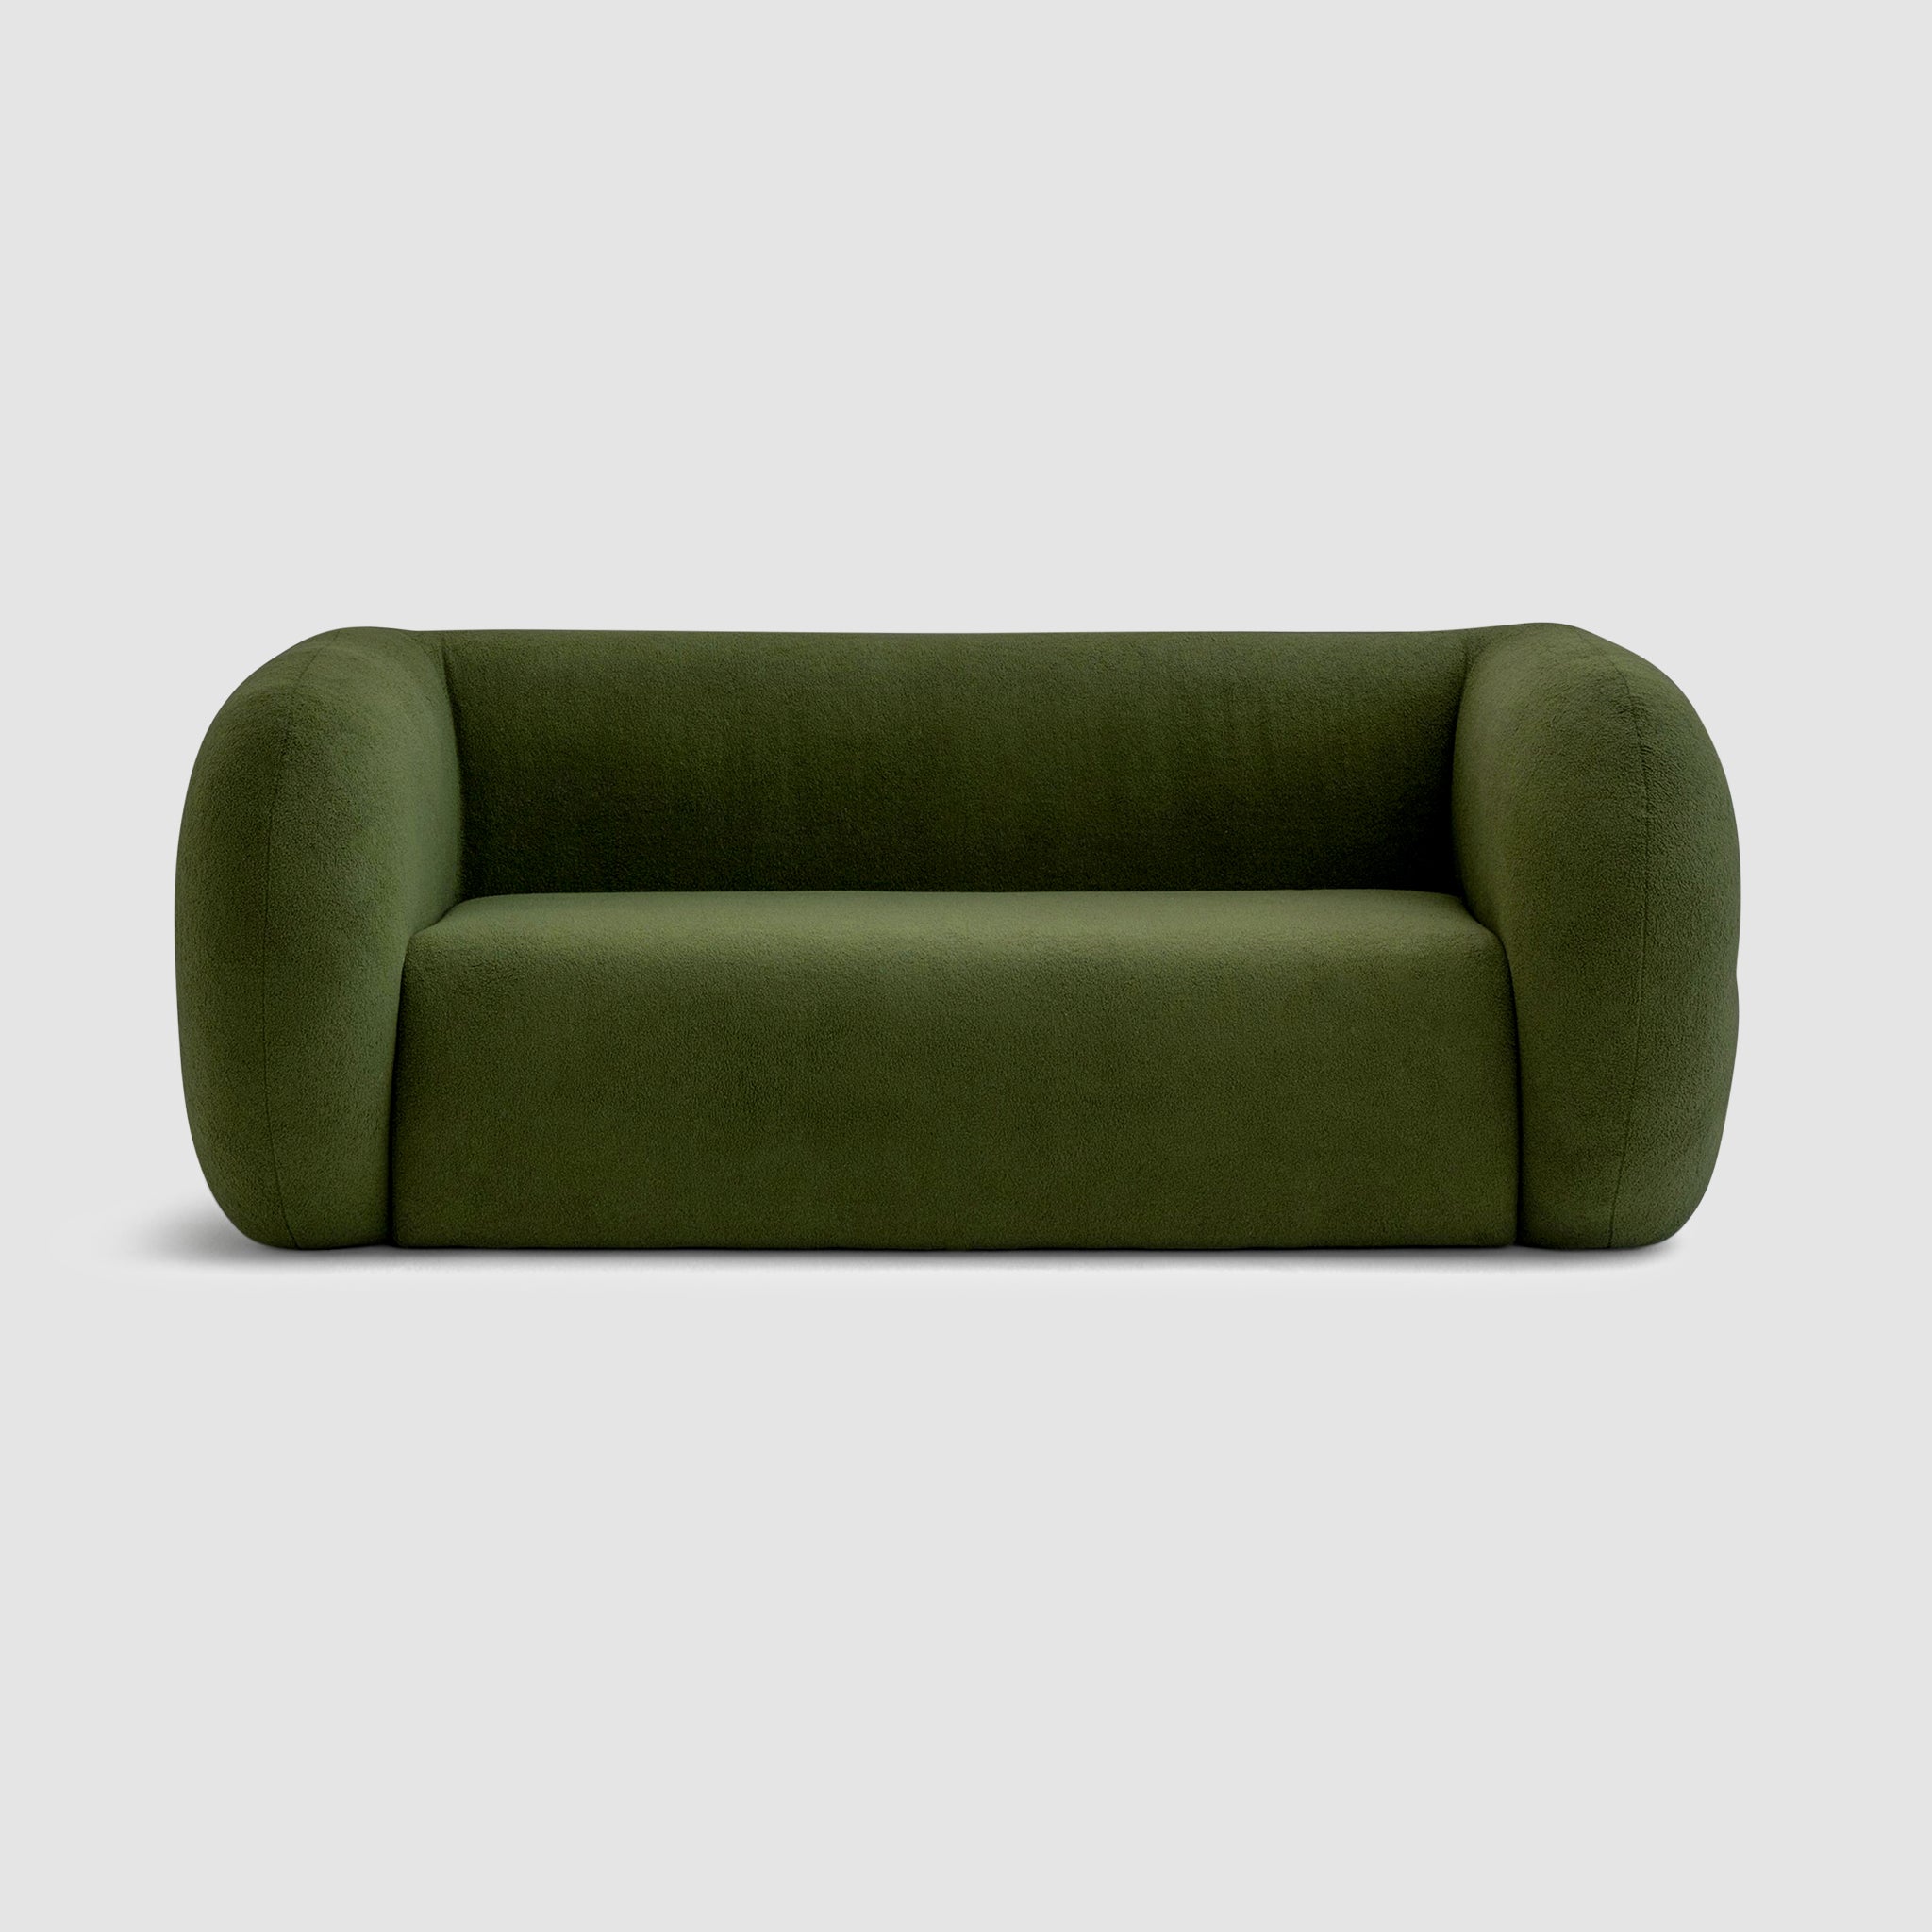 The Ruthie Sofa in green fabric, showcasing its unique, rounded design with curves, and a smooth back and sides that are as captivating as the front. The 2m sofa comfortably seats 2-3 people and features medium-soft cushions for ultimate comfort.